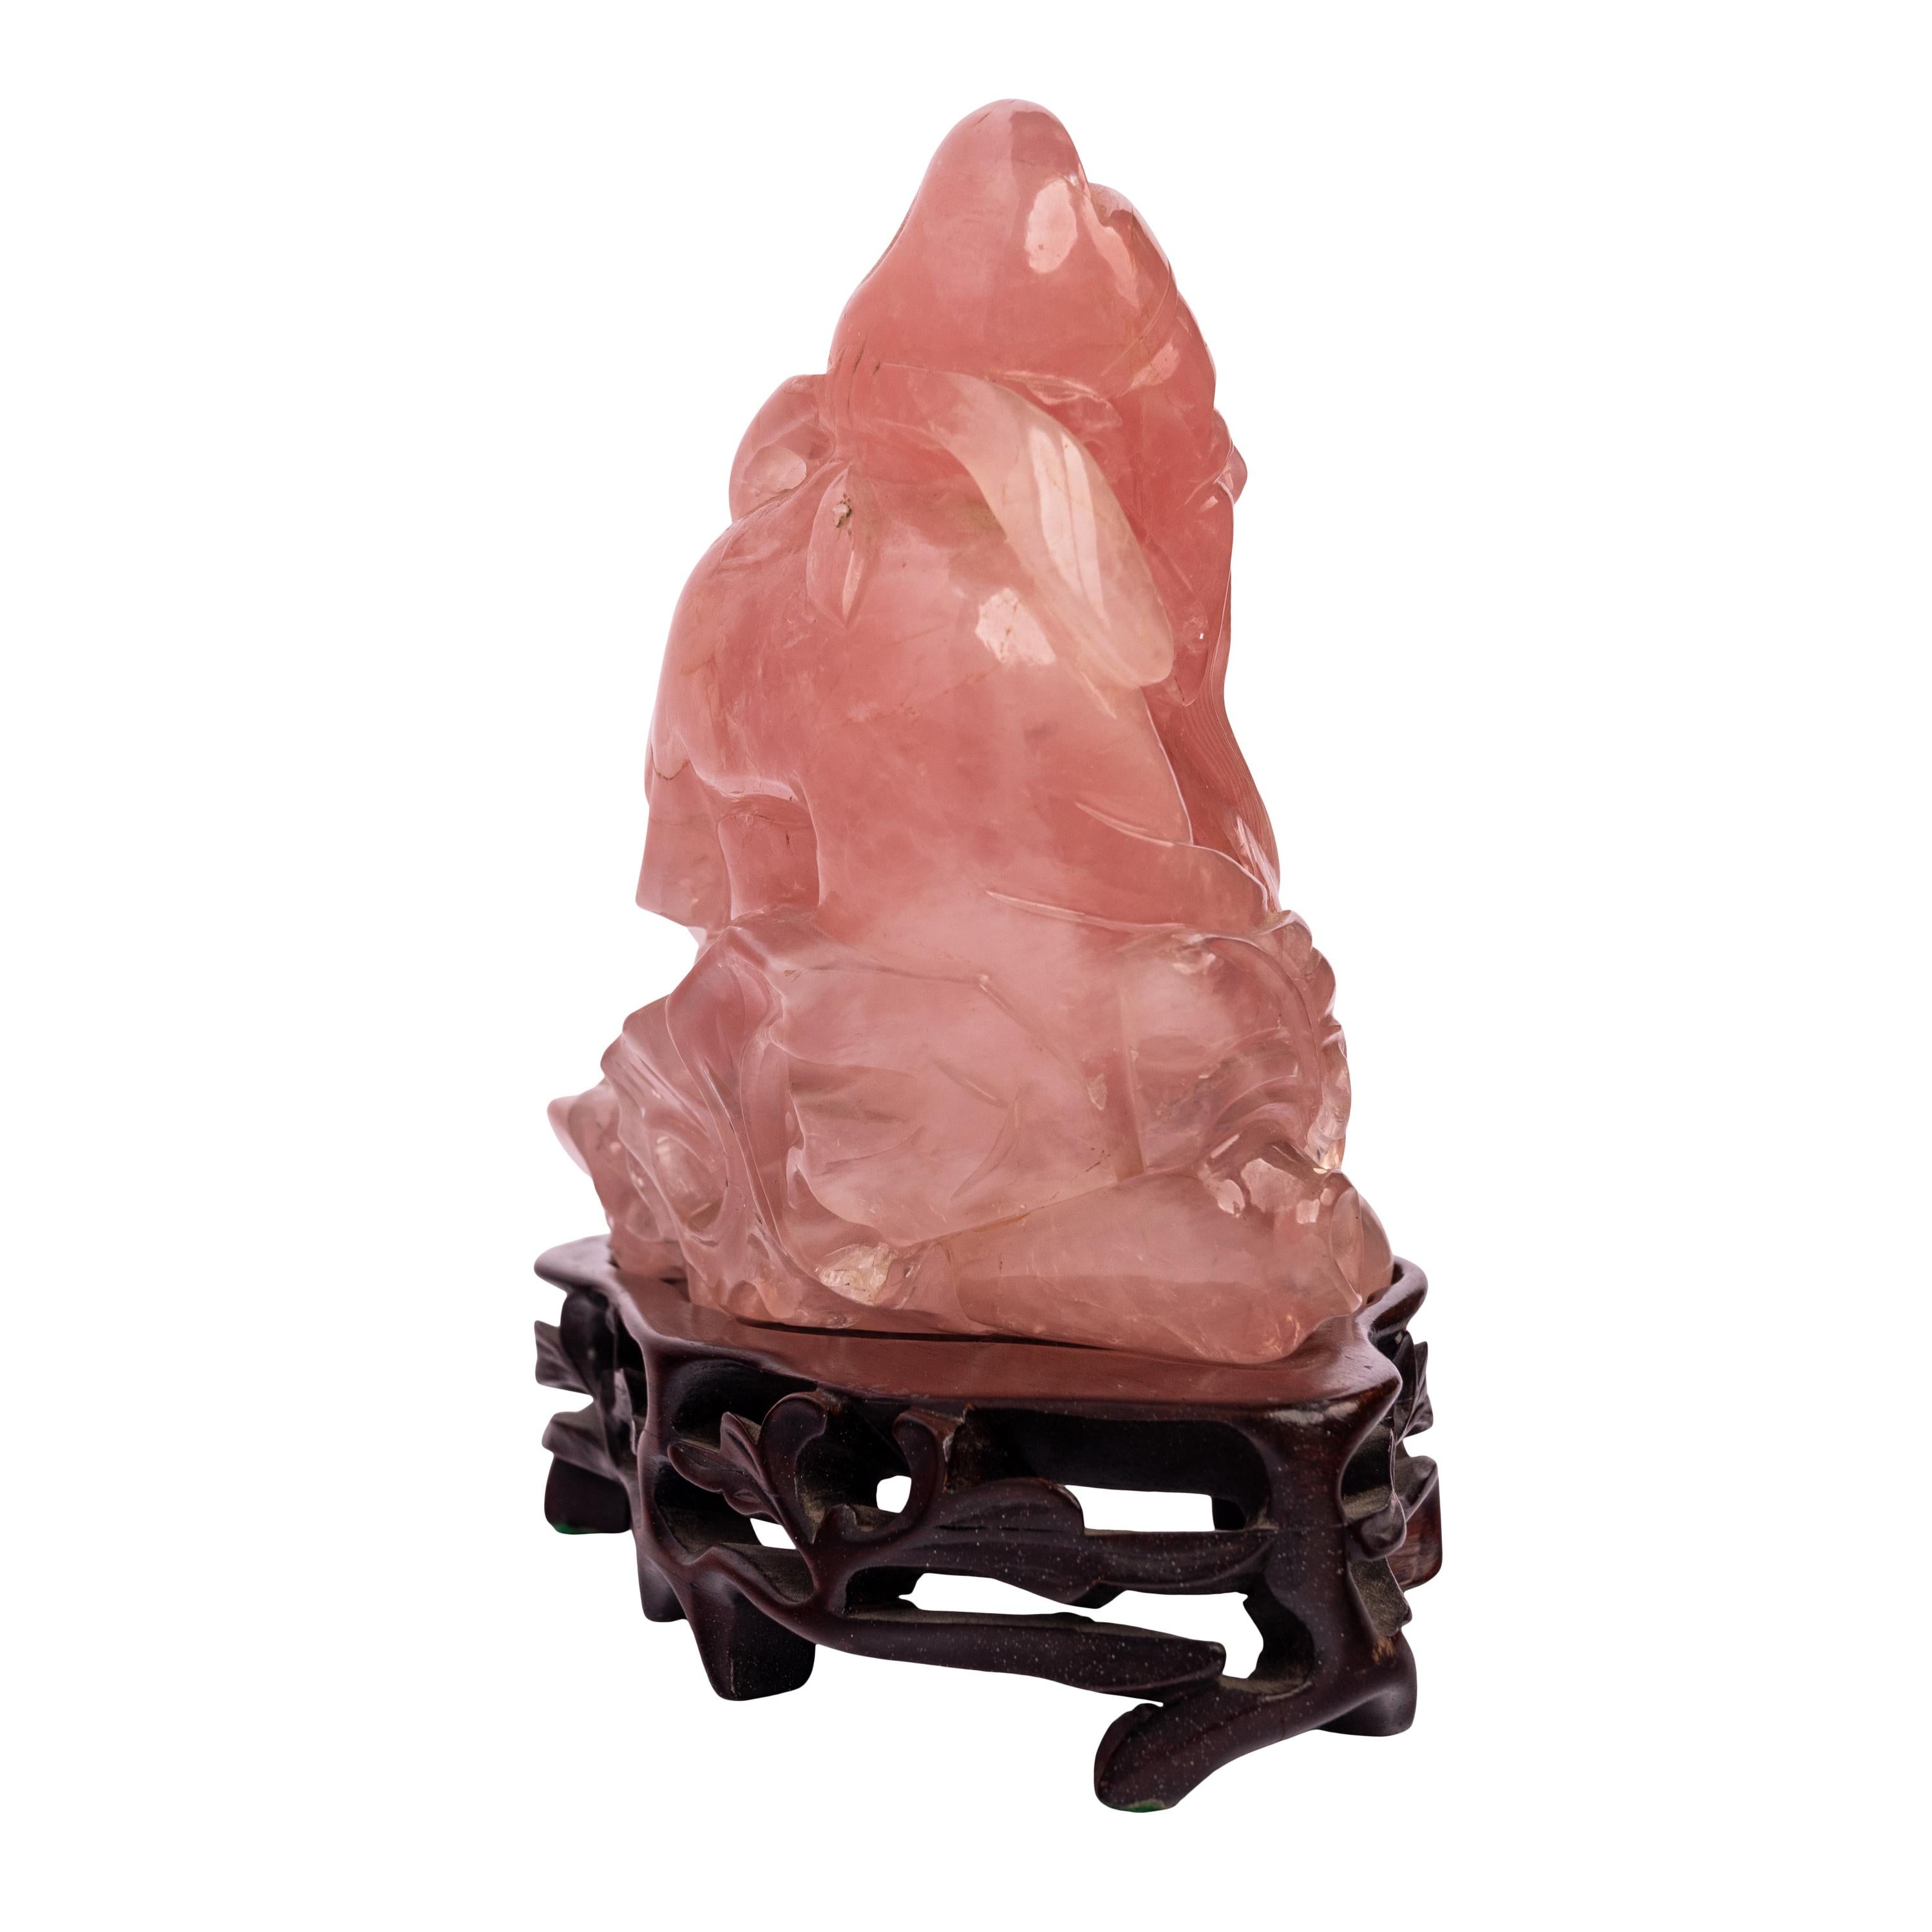 Chinese Export Antique Chinese Qing Dynasty Carved Rose Quartz Hotei Buddha Statue & Stand 1910 For Sale